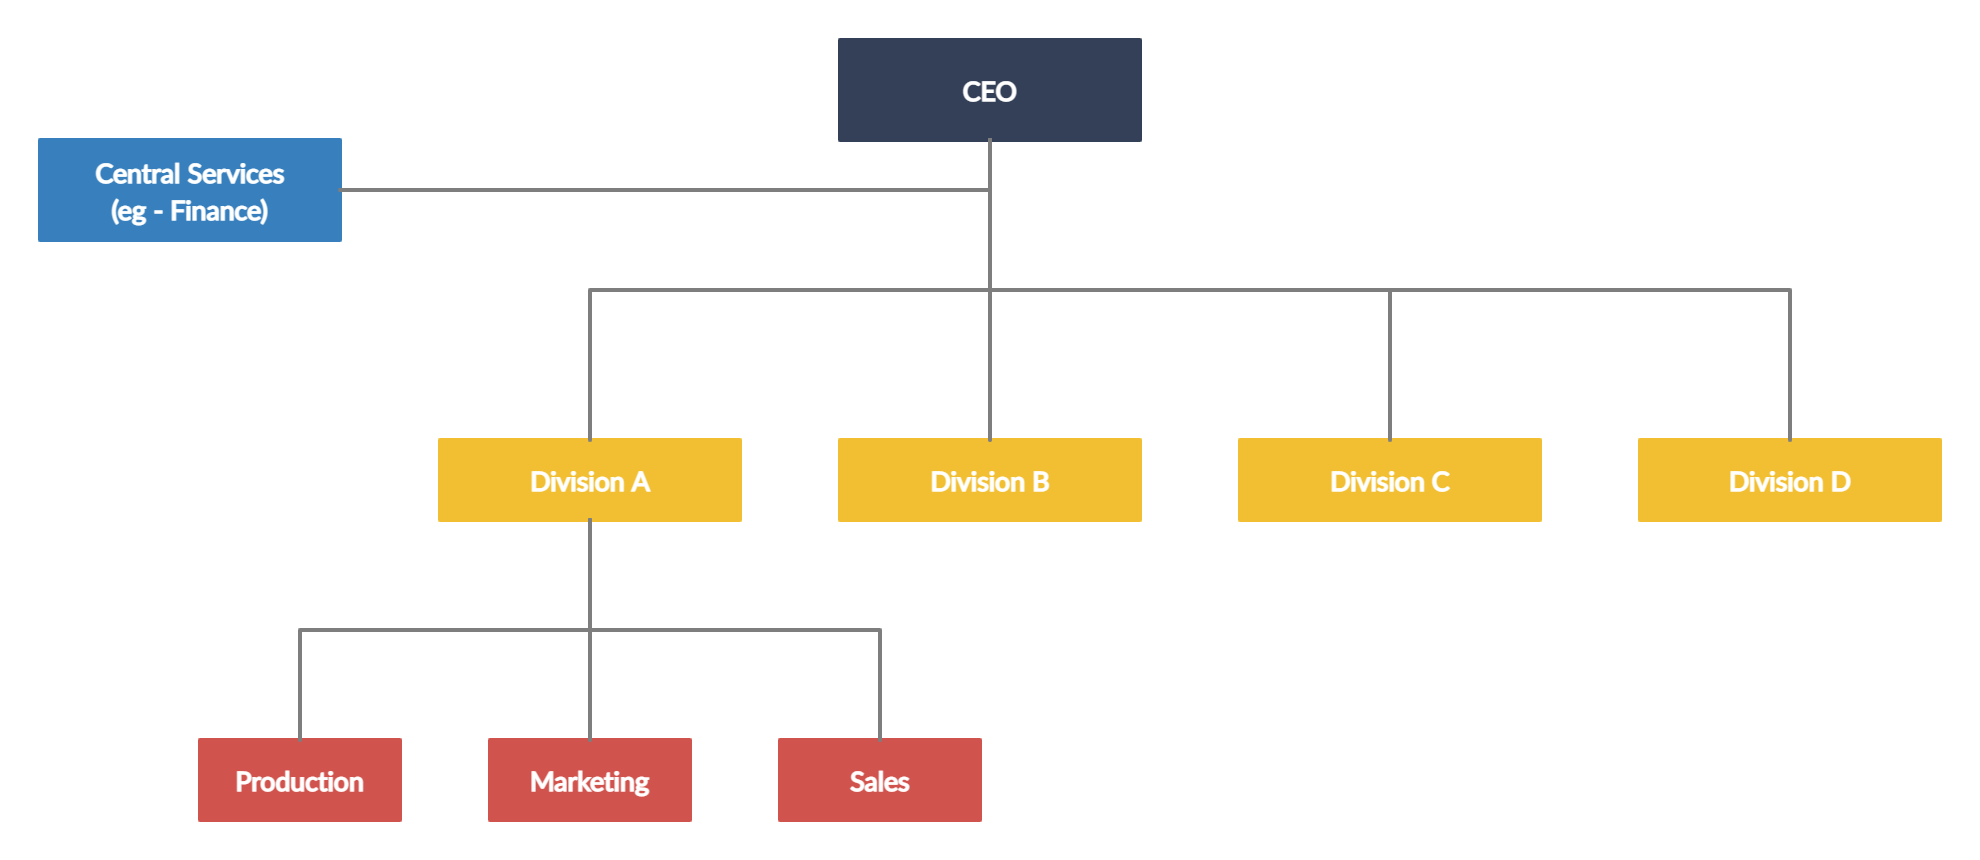 Divisional Organizational Chart is one of the popular organizational chart types